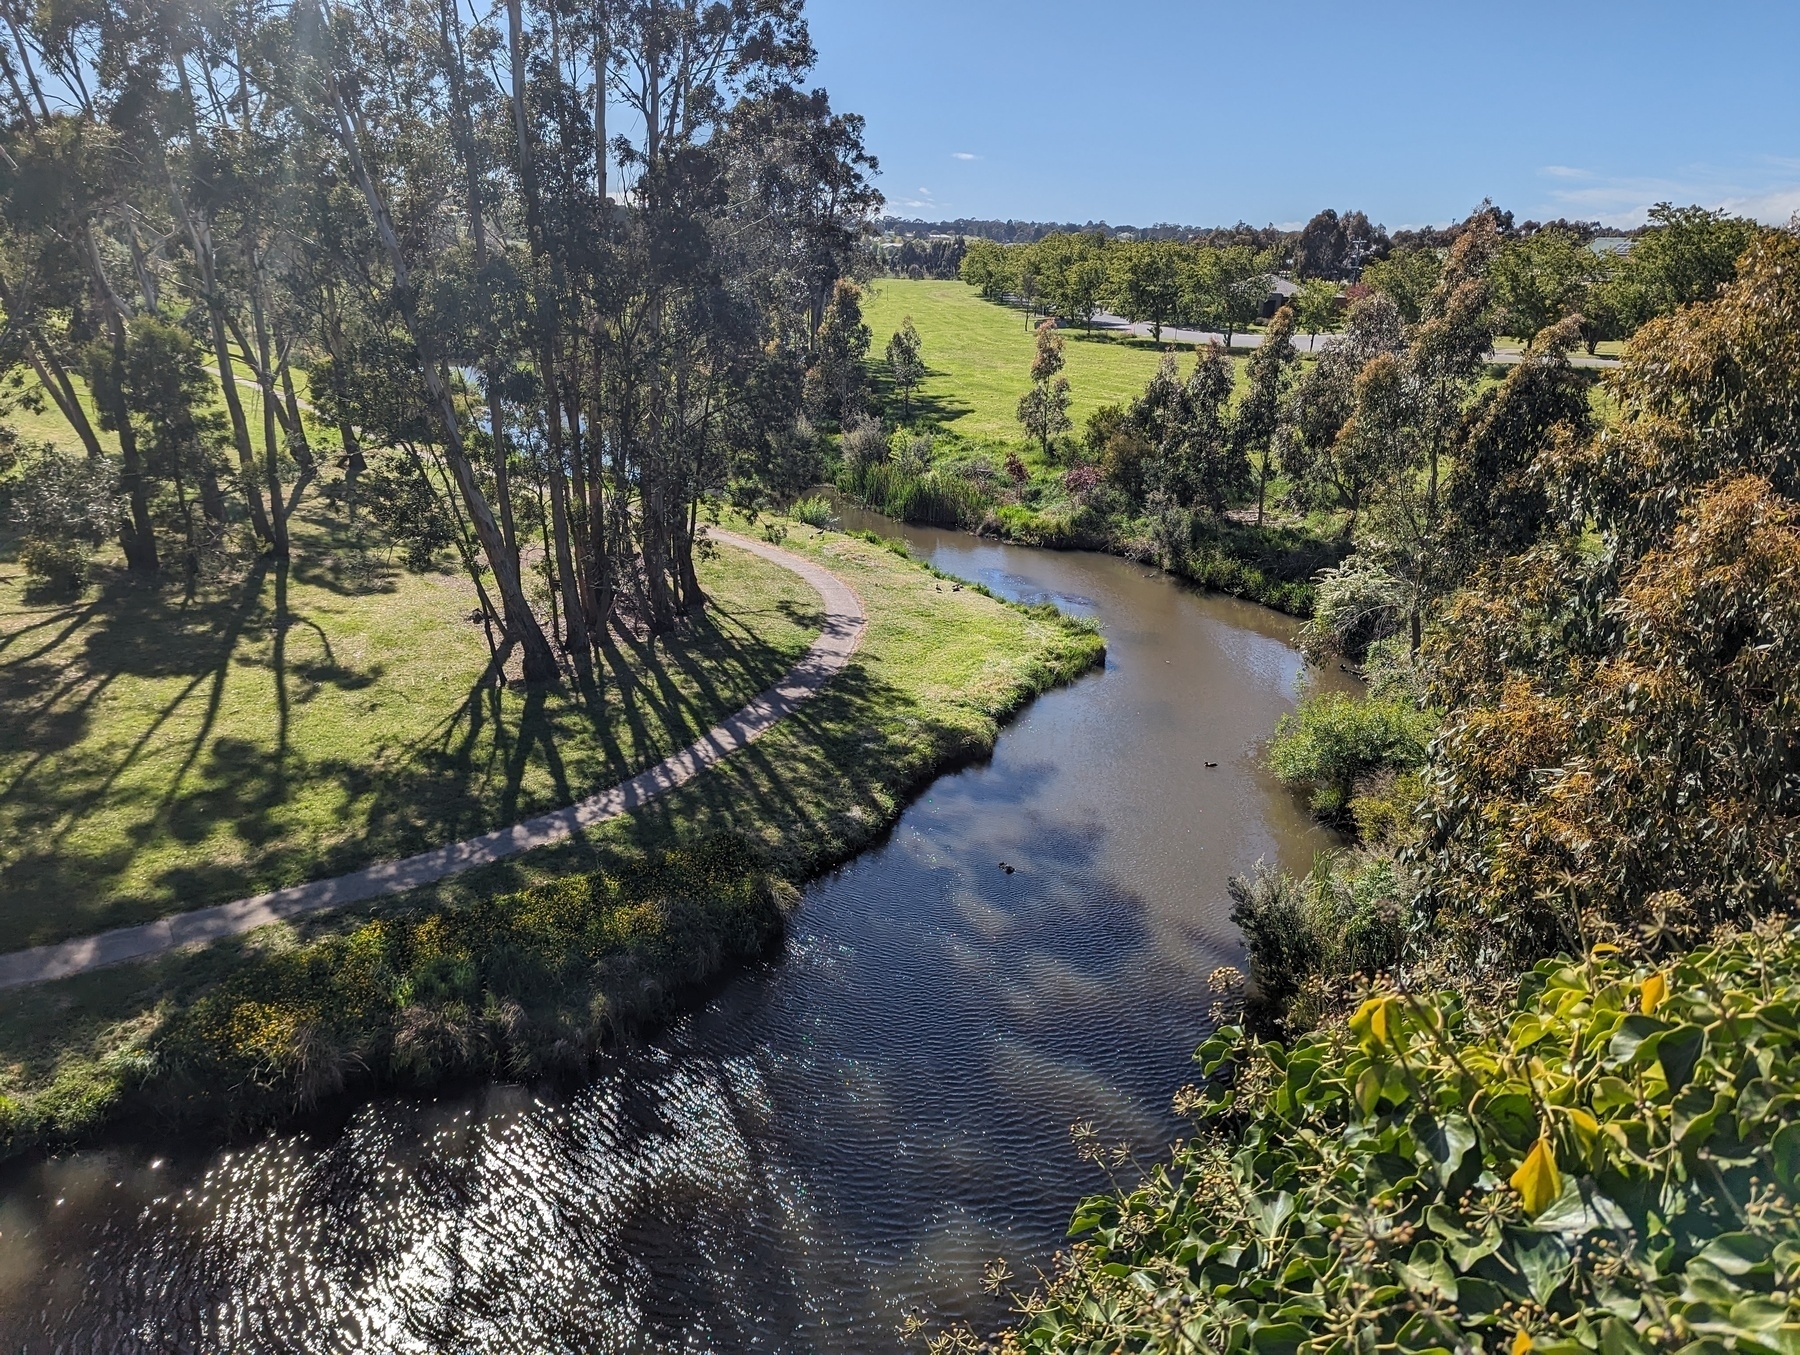 The Campaspe River, twisting towards the Kyneton town under a blue sky. The photo was taken from a bridge.